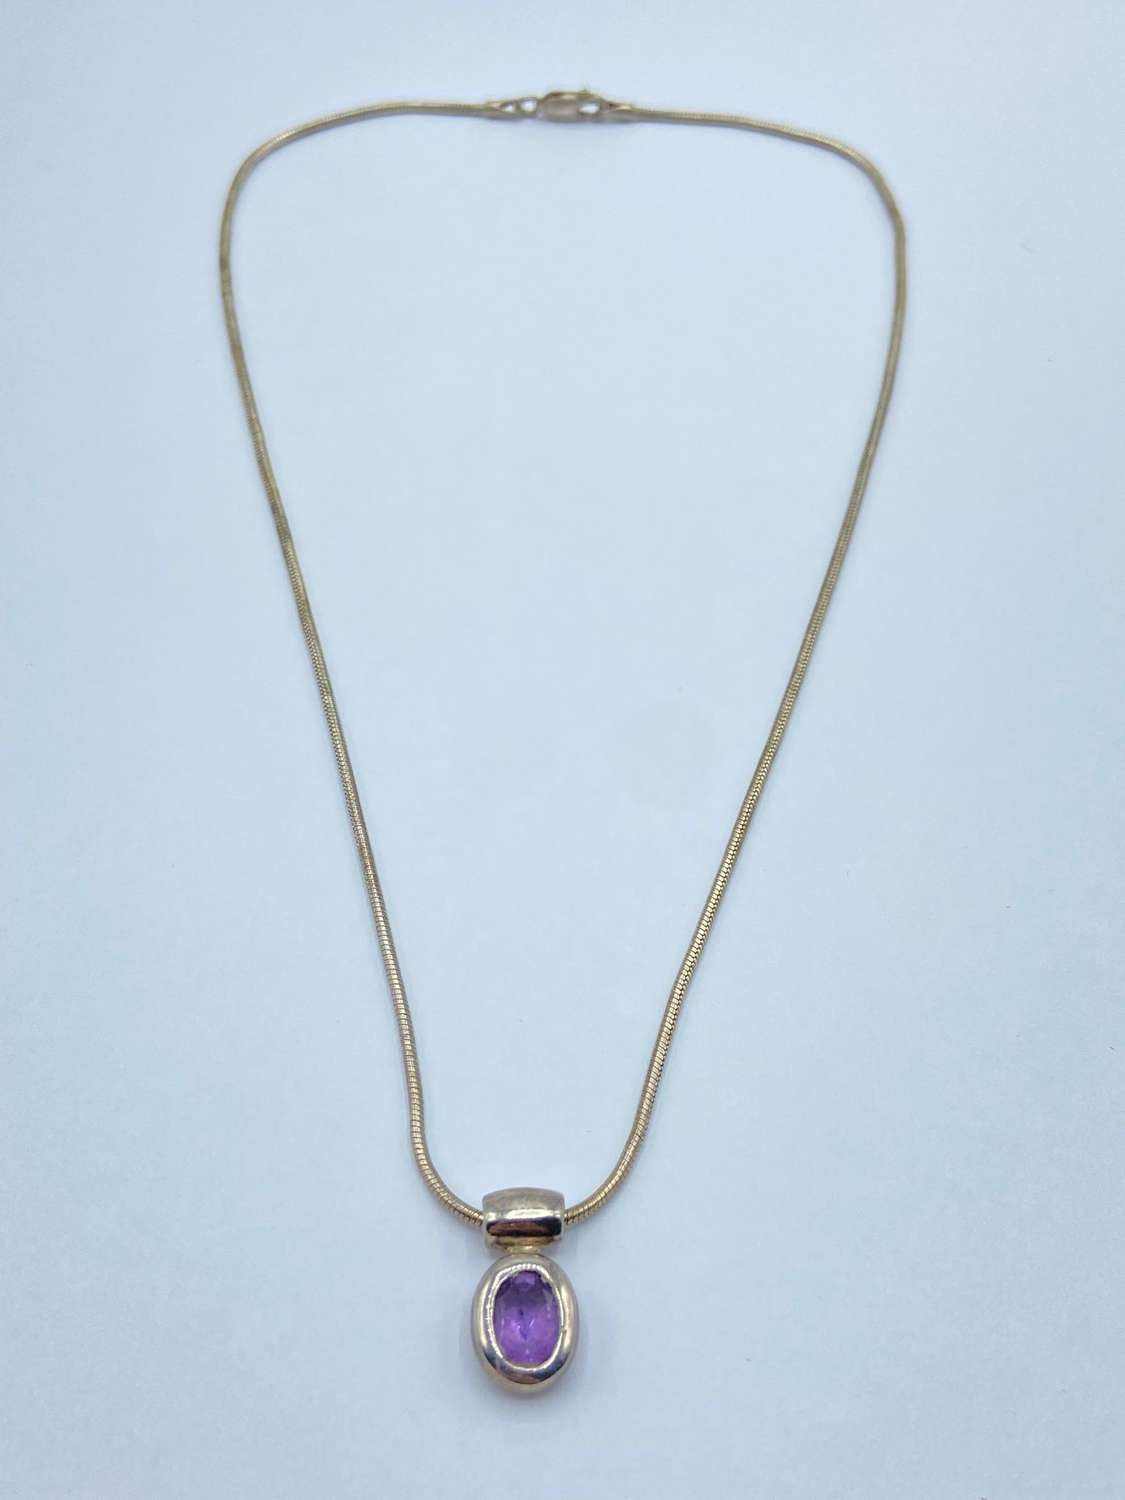 Beautiful Vintage Sterling Silver & Faceted Amethyst Necklace